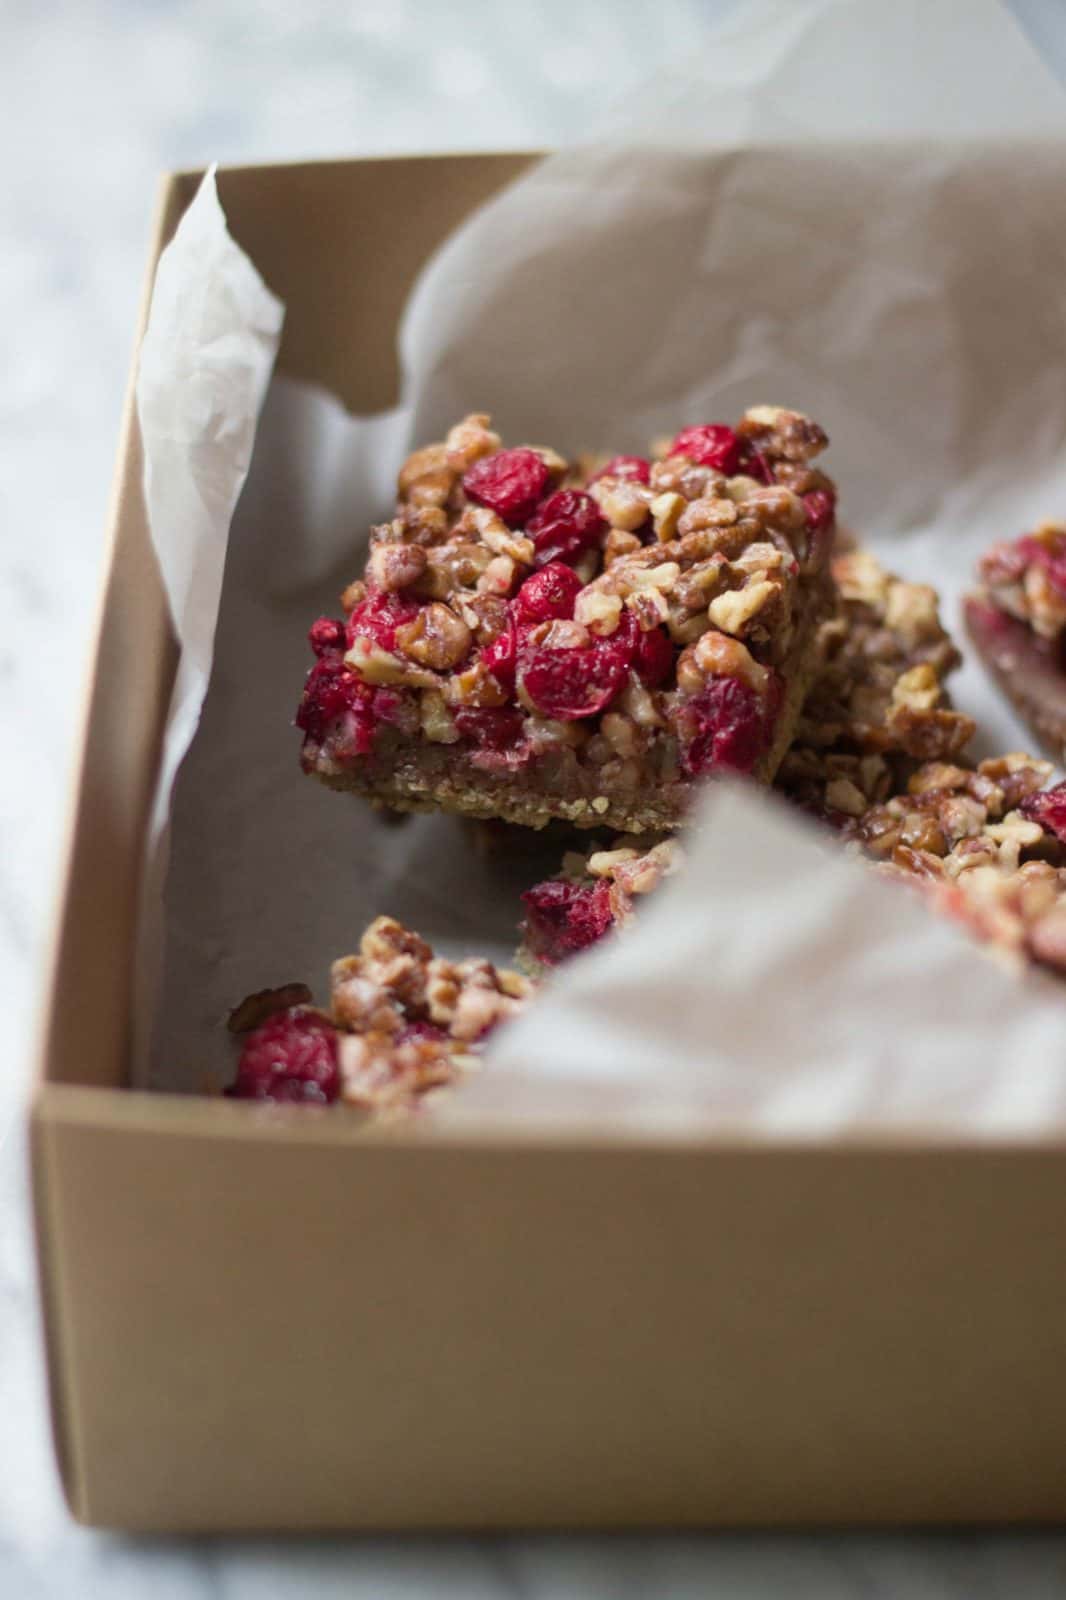 Angle shot of cranberry pecan bars in a container with white parchment paper.